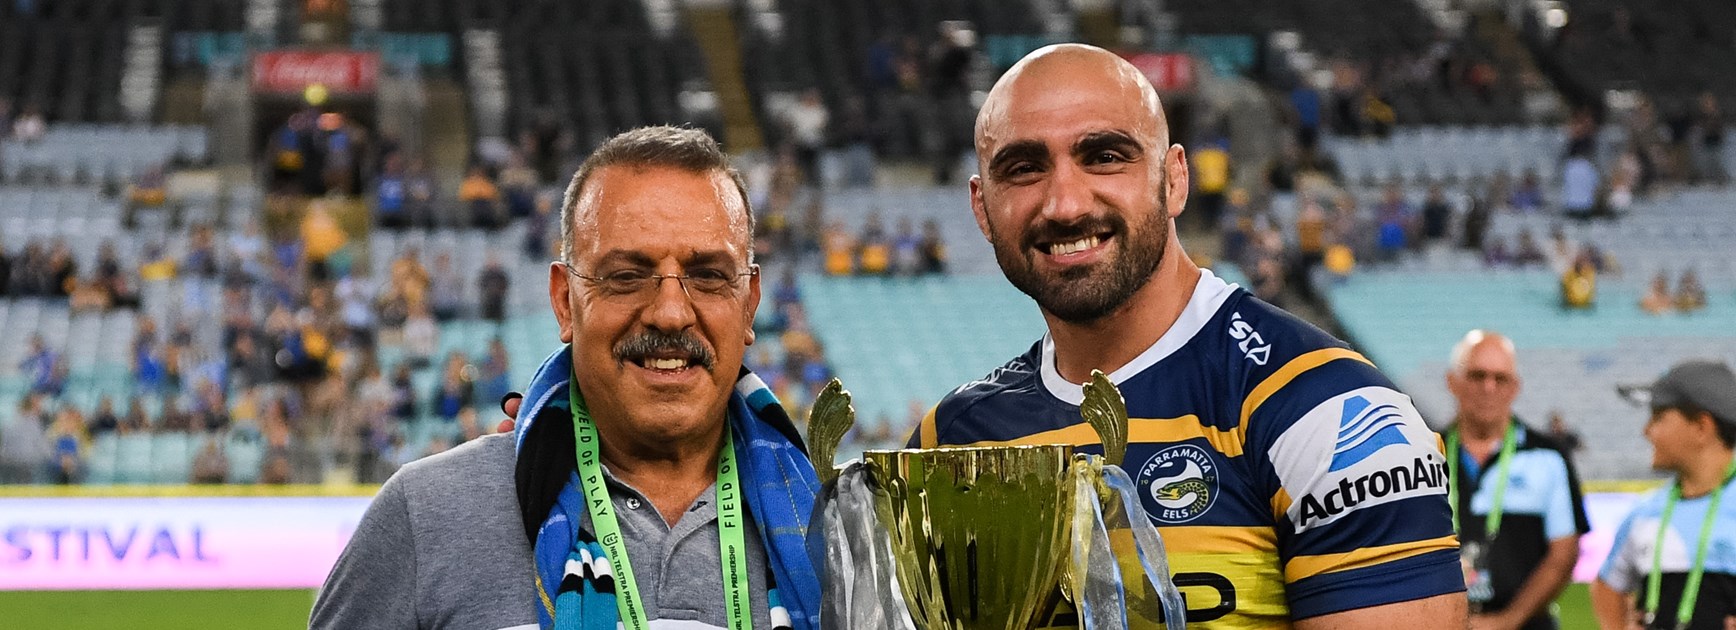 Eels to play for Johnny Mannah Cup in Round 13